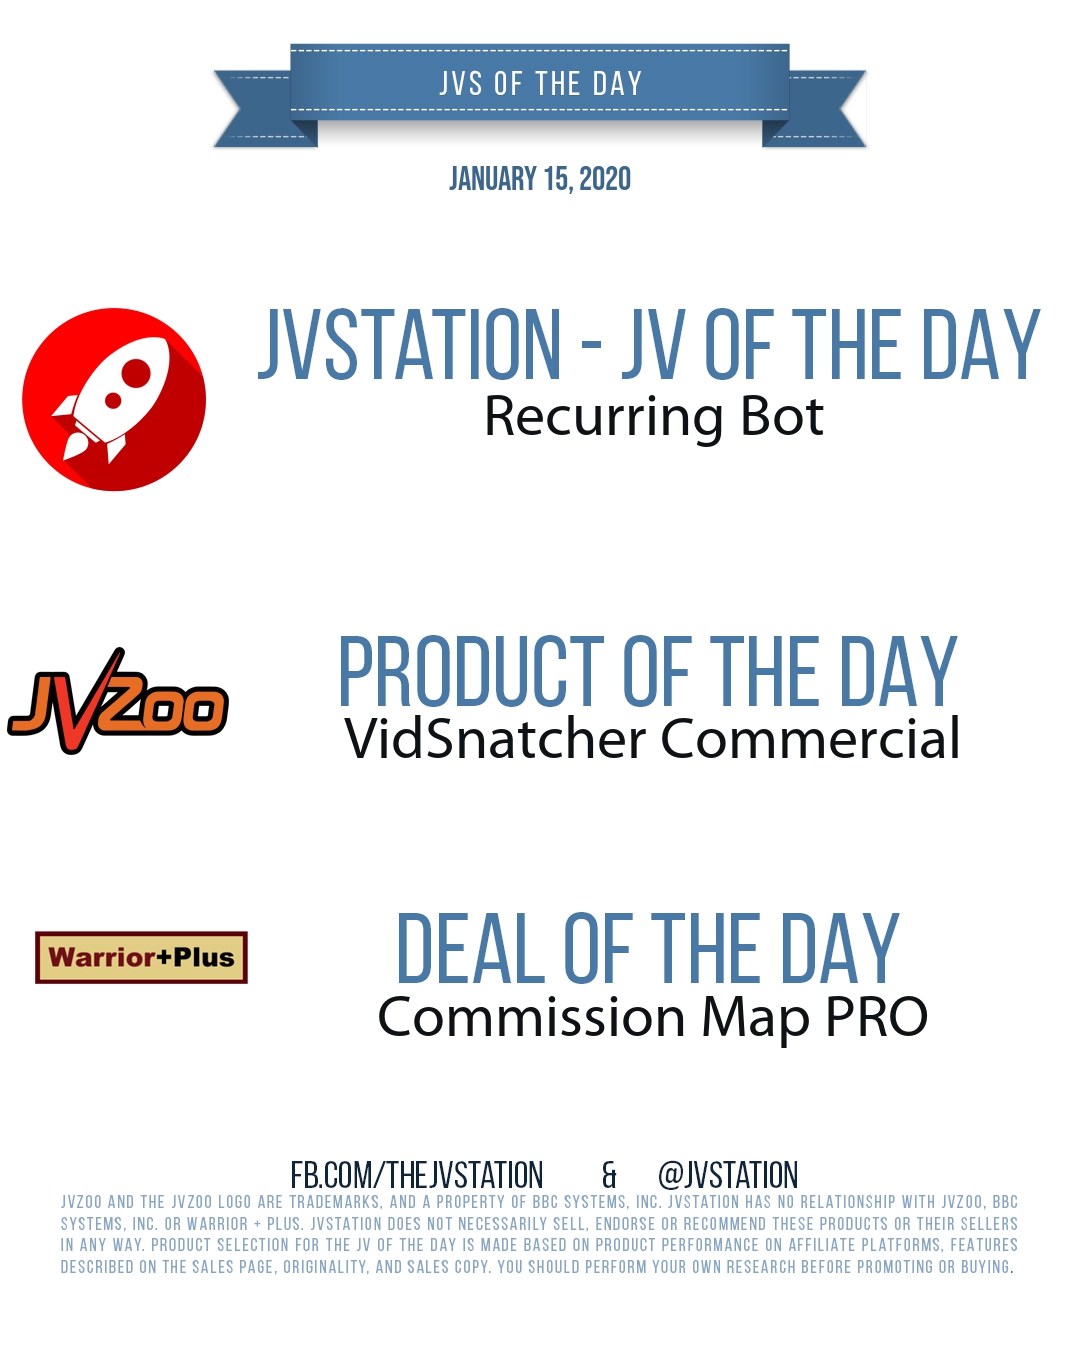 JVs of the day - January 15, 2020